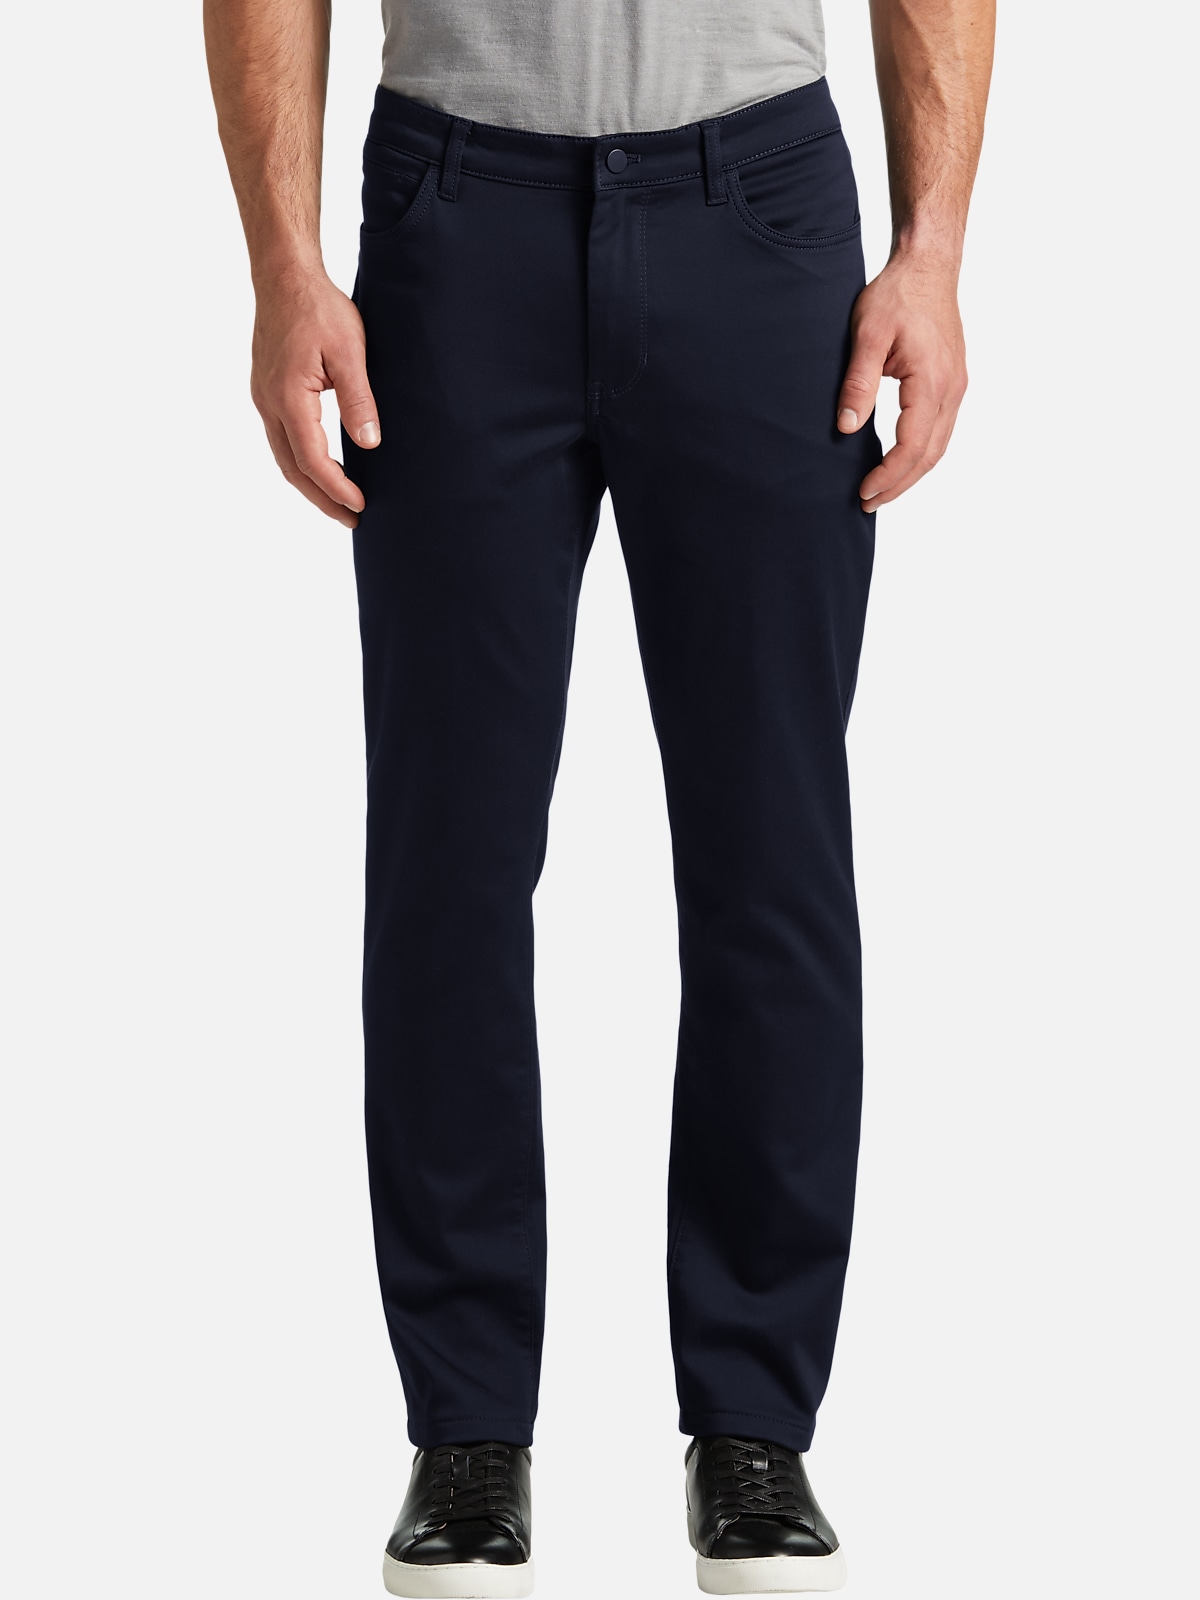 Awearness Kenneth Cole Modern Fit Stretch Waist Pants | All Clearance ...